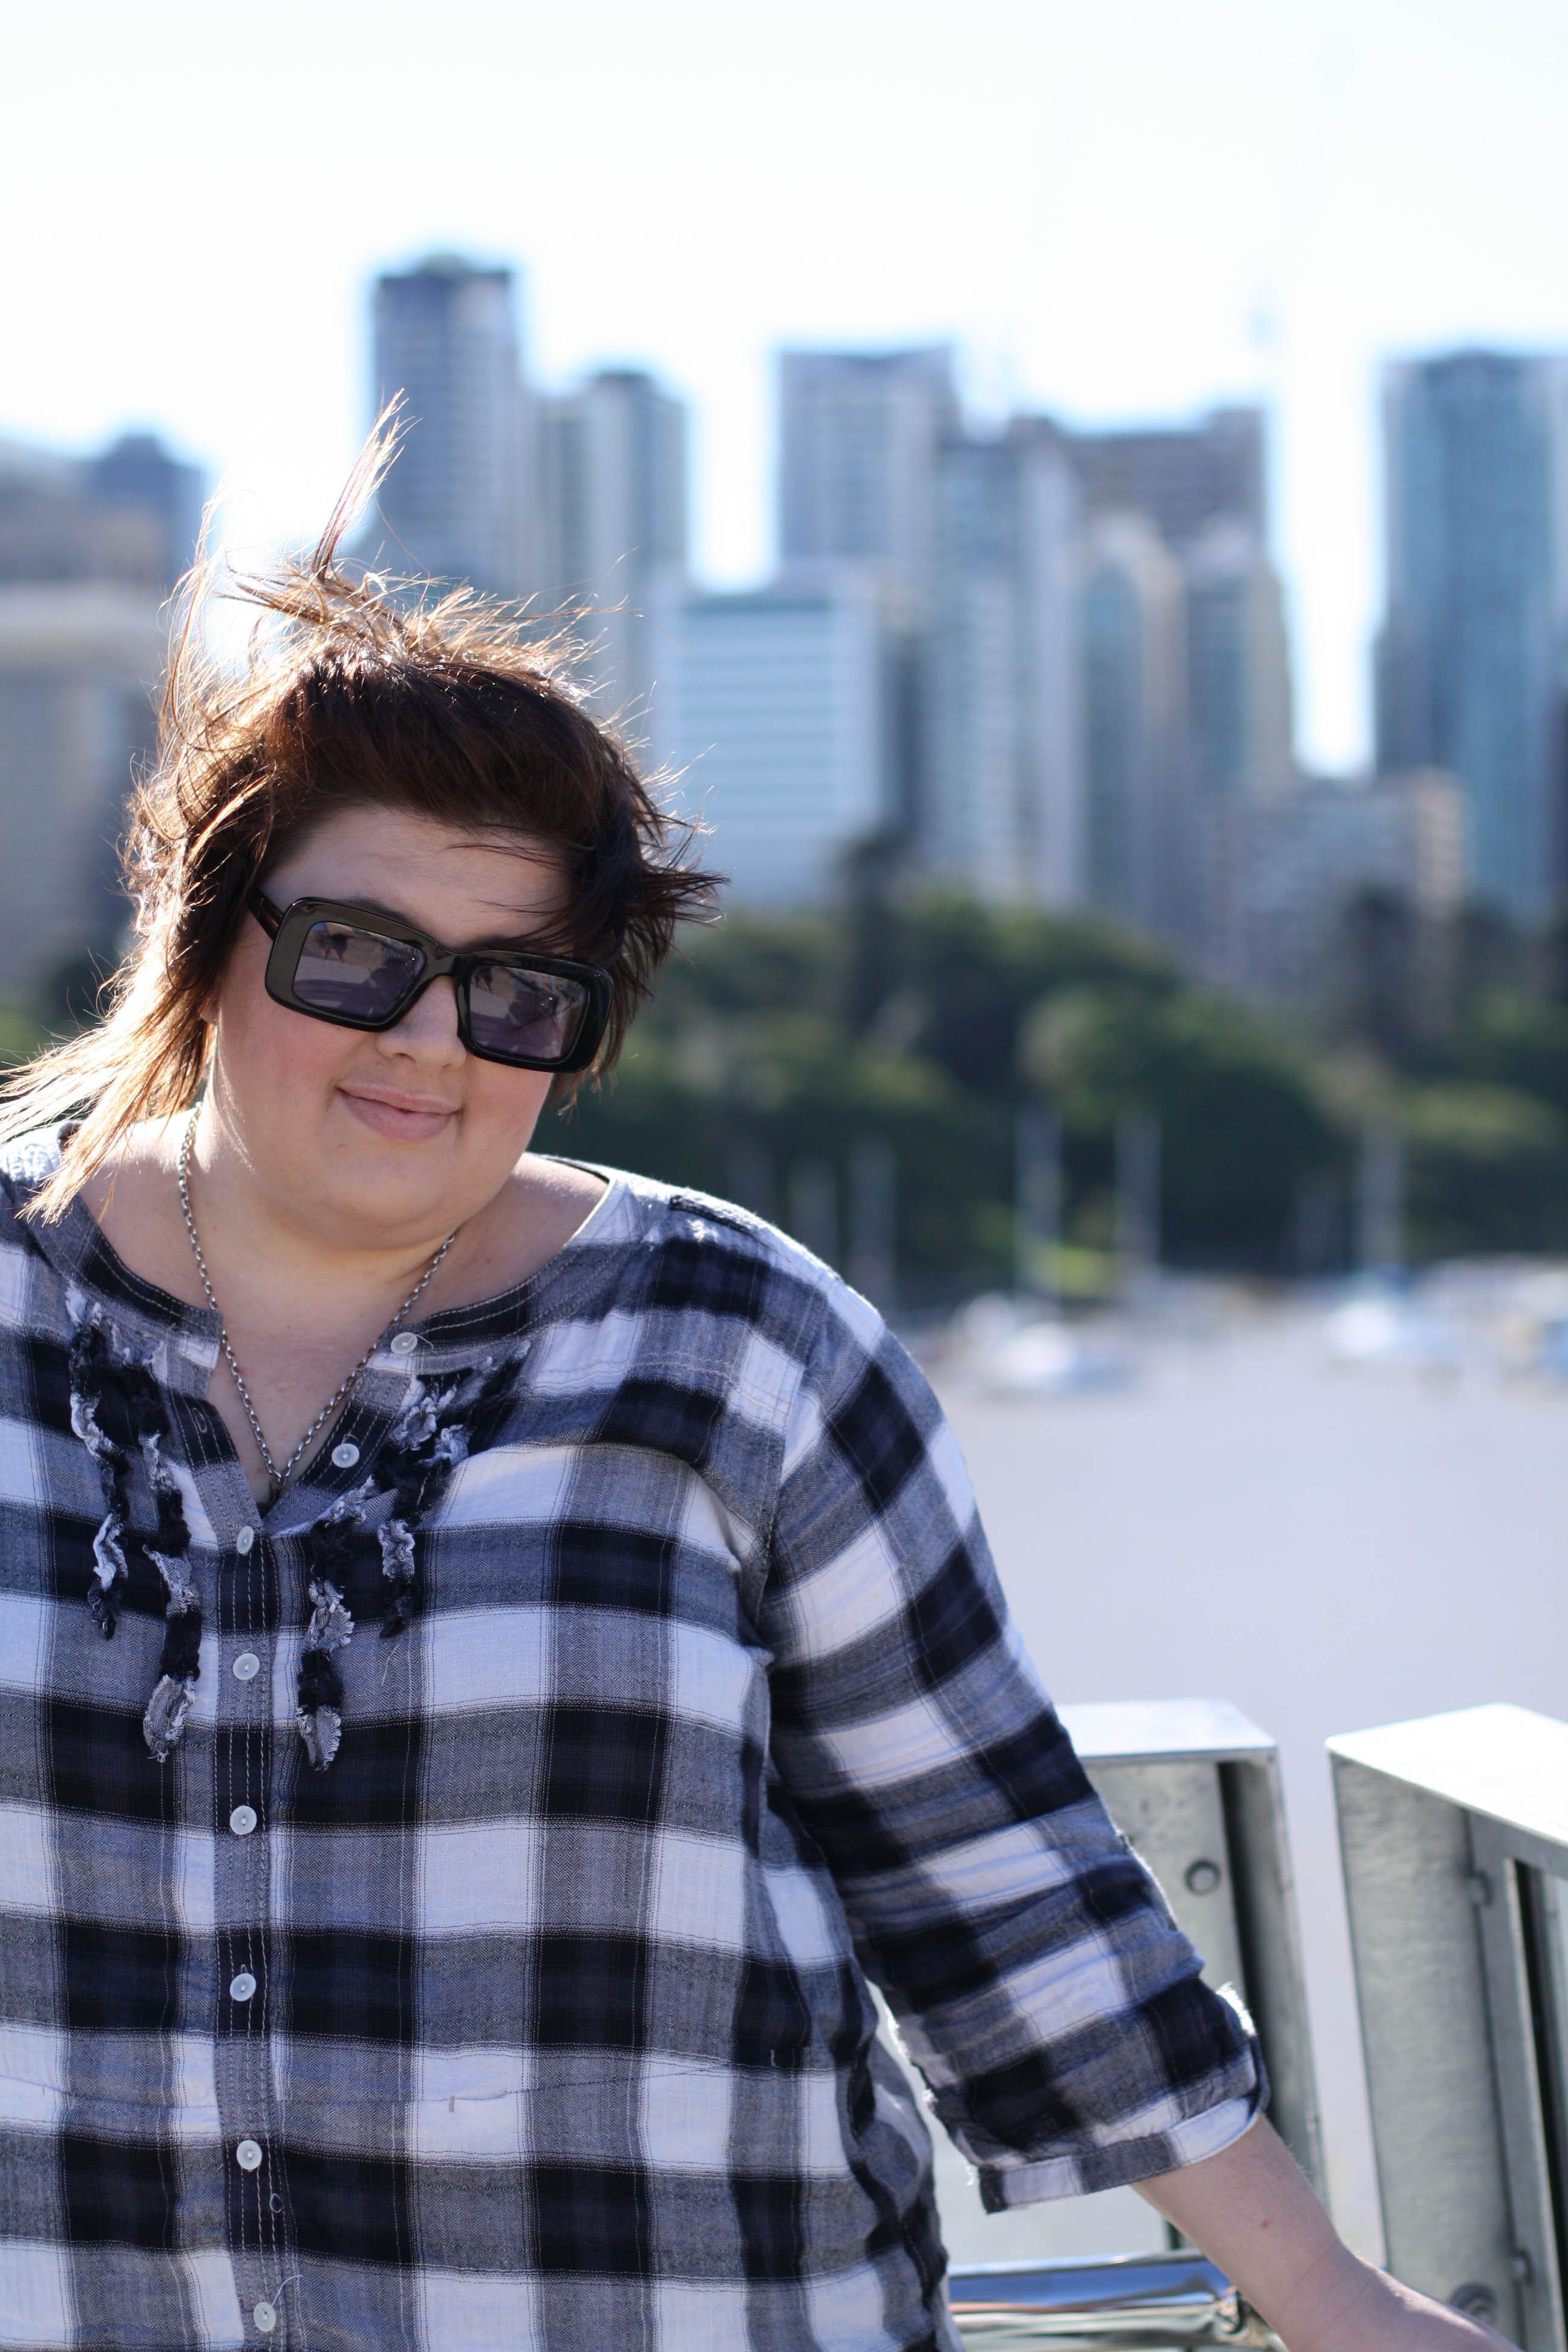 Photo of me with the CBD in the background - my hair is very windswept!